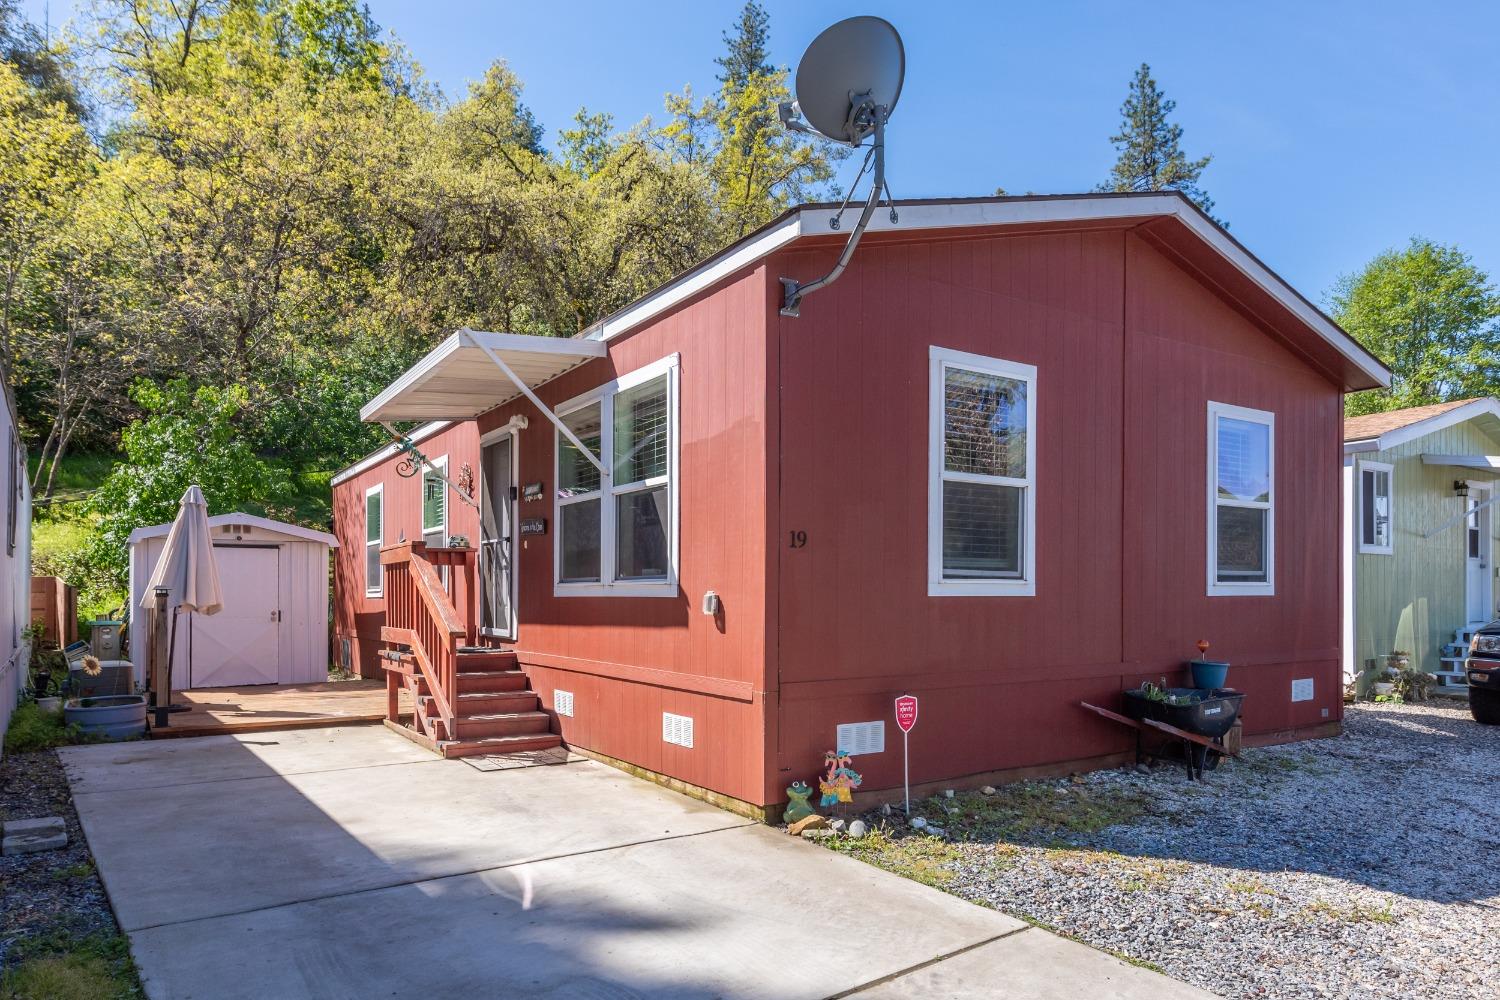 Photo of 3020 Newtown Rd #19 in Placerville, CA